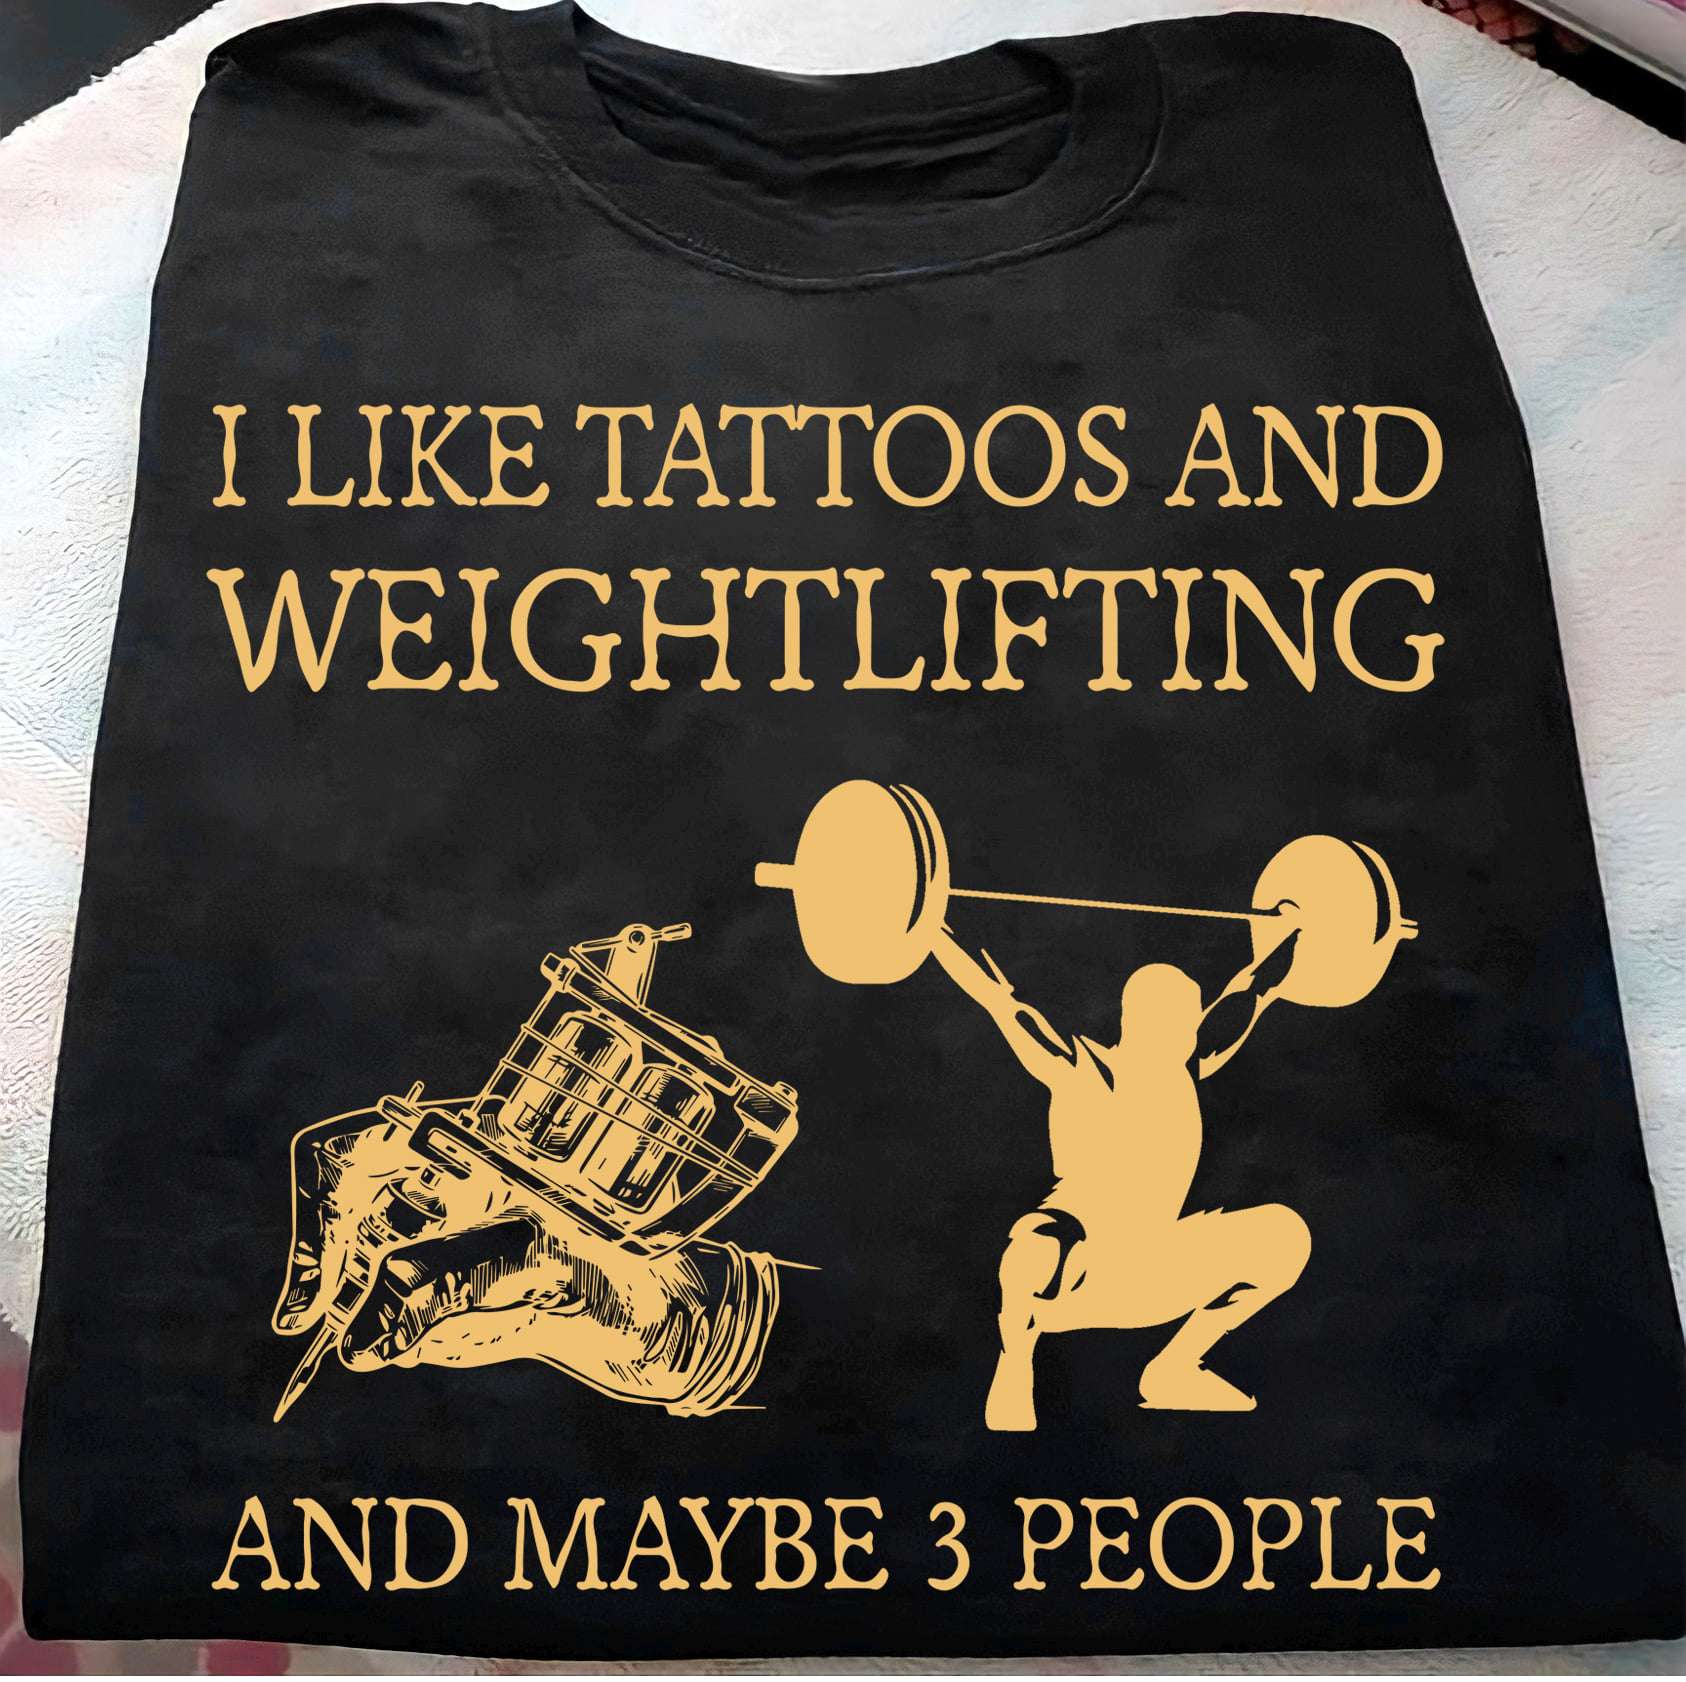 I like tattoos and weightlifting and maybe 3 people - Lifting fitness man